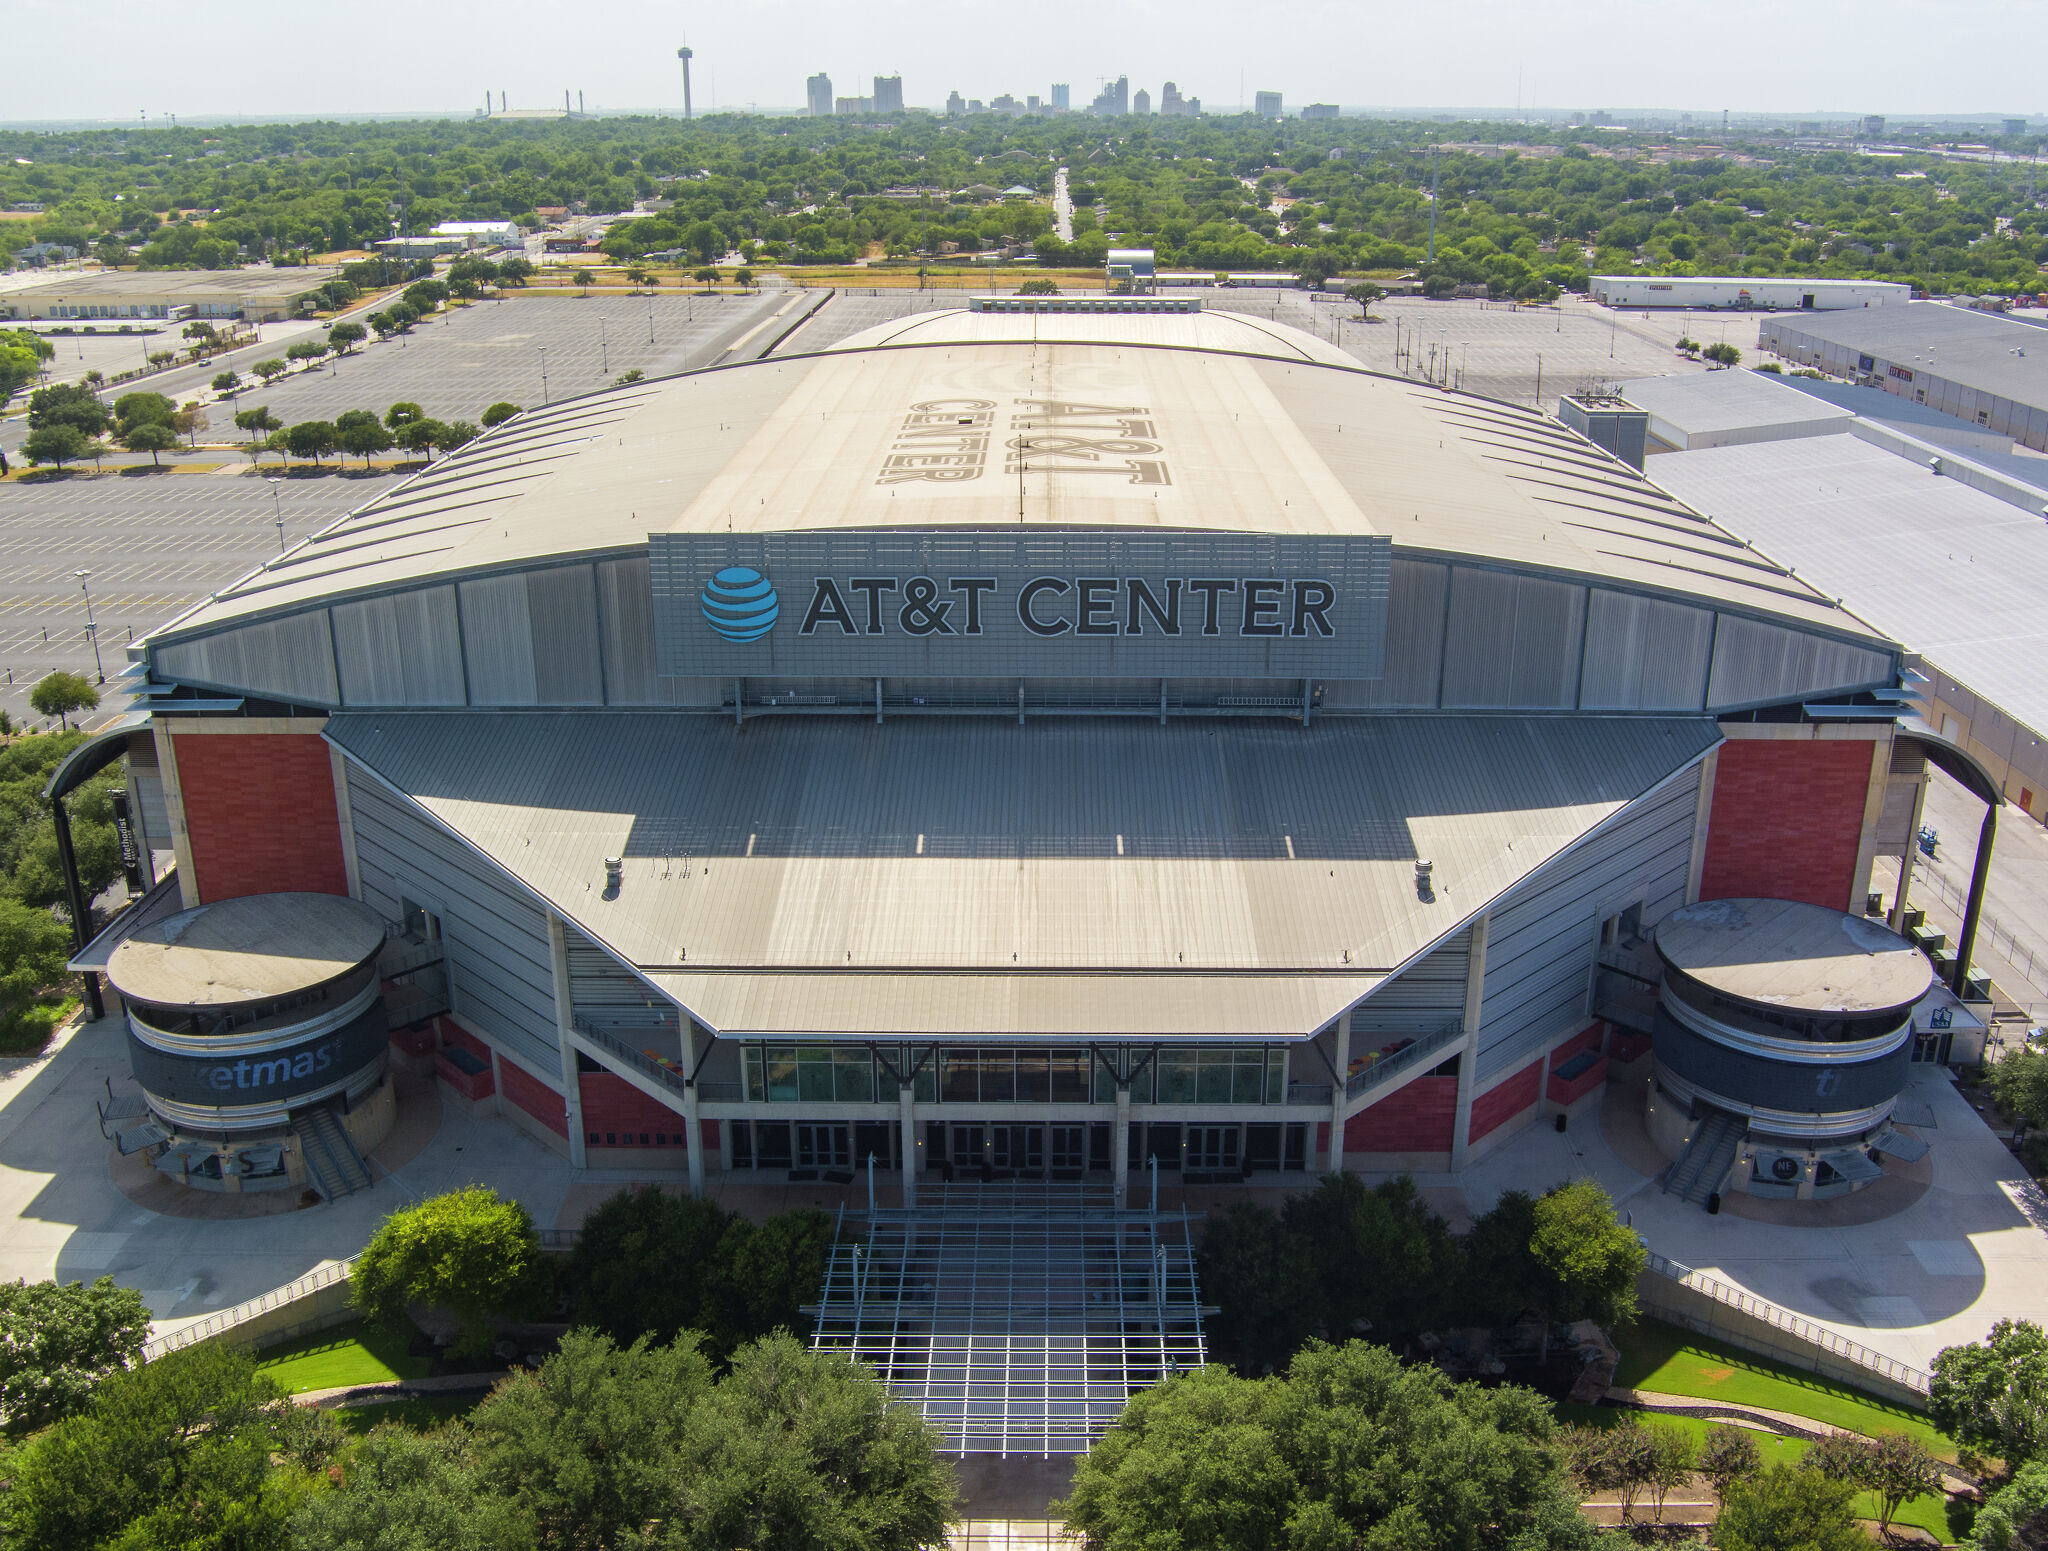 4 Things to Know When Attending a Spurs Game at the AT&T Center - San  Antonio Magazine